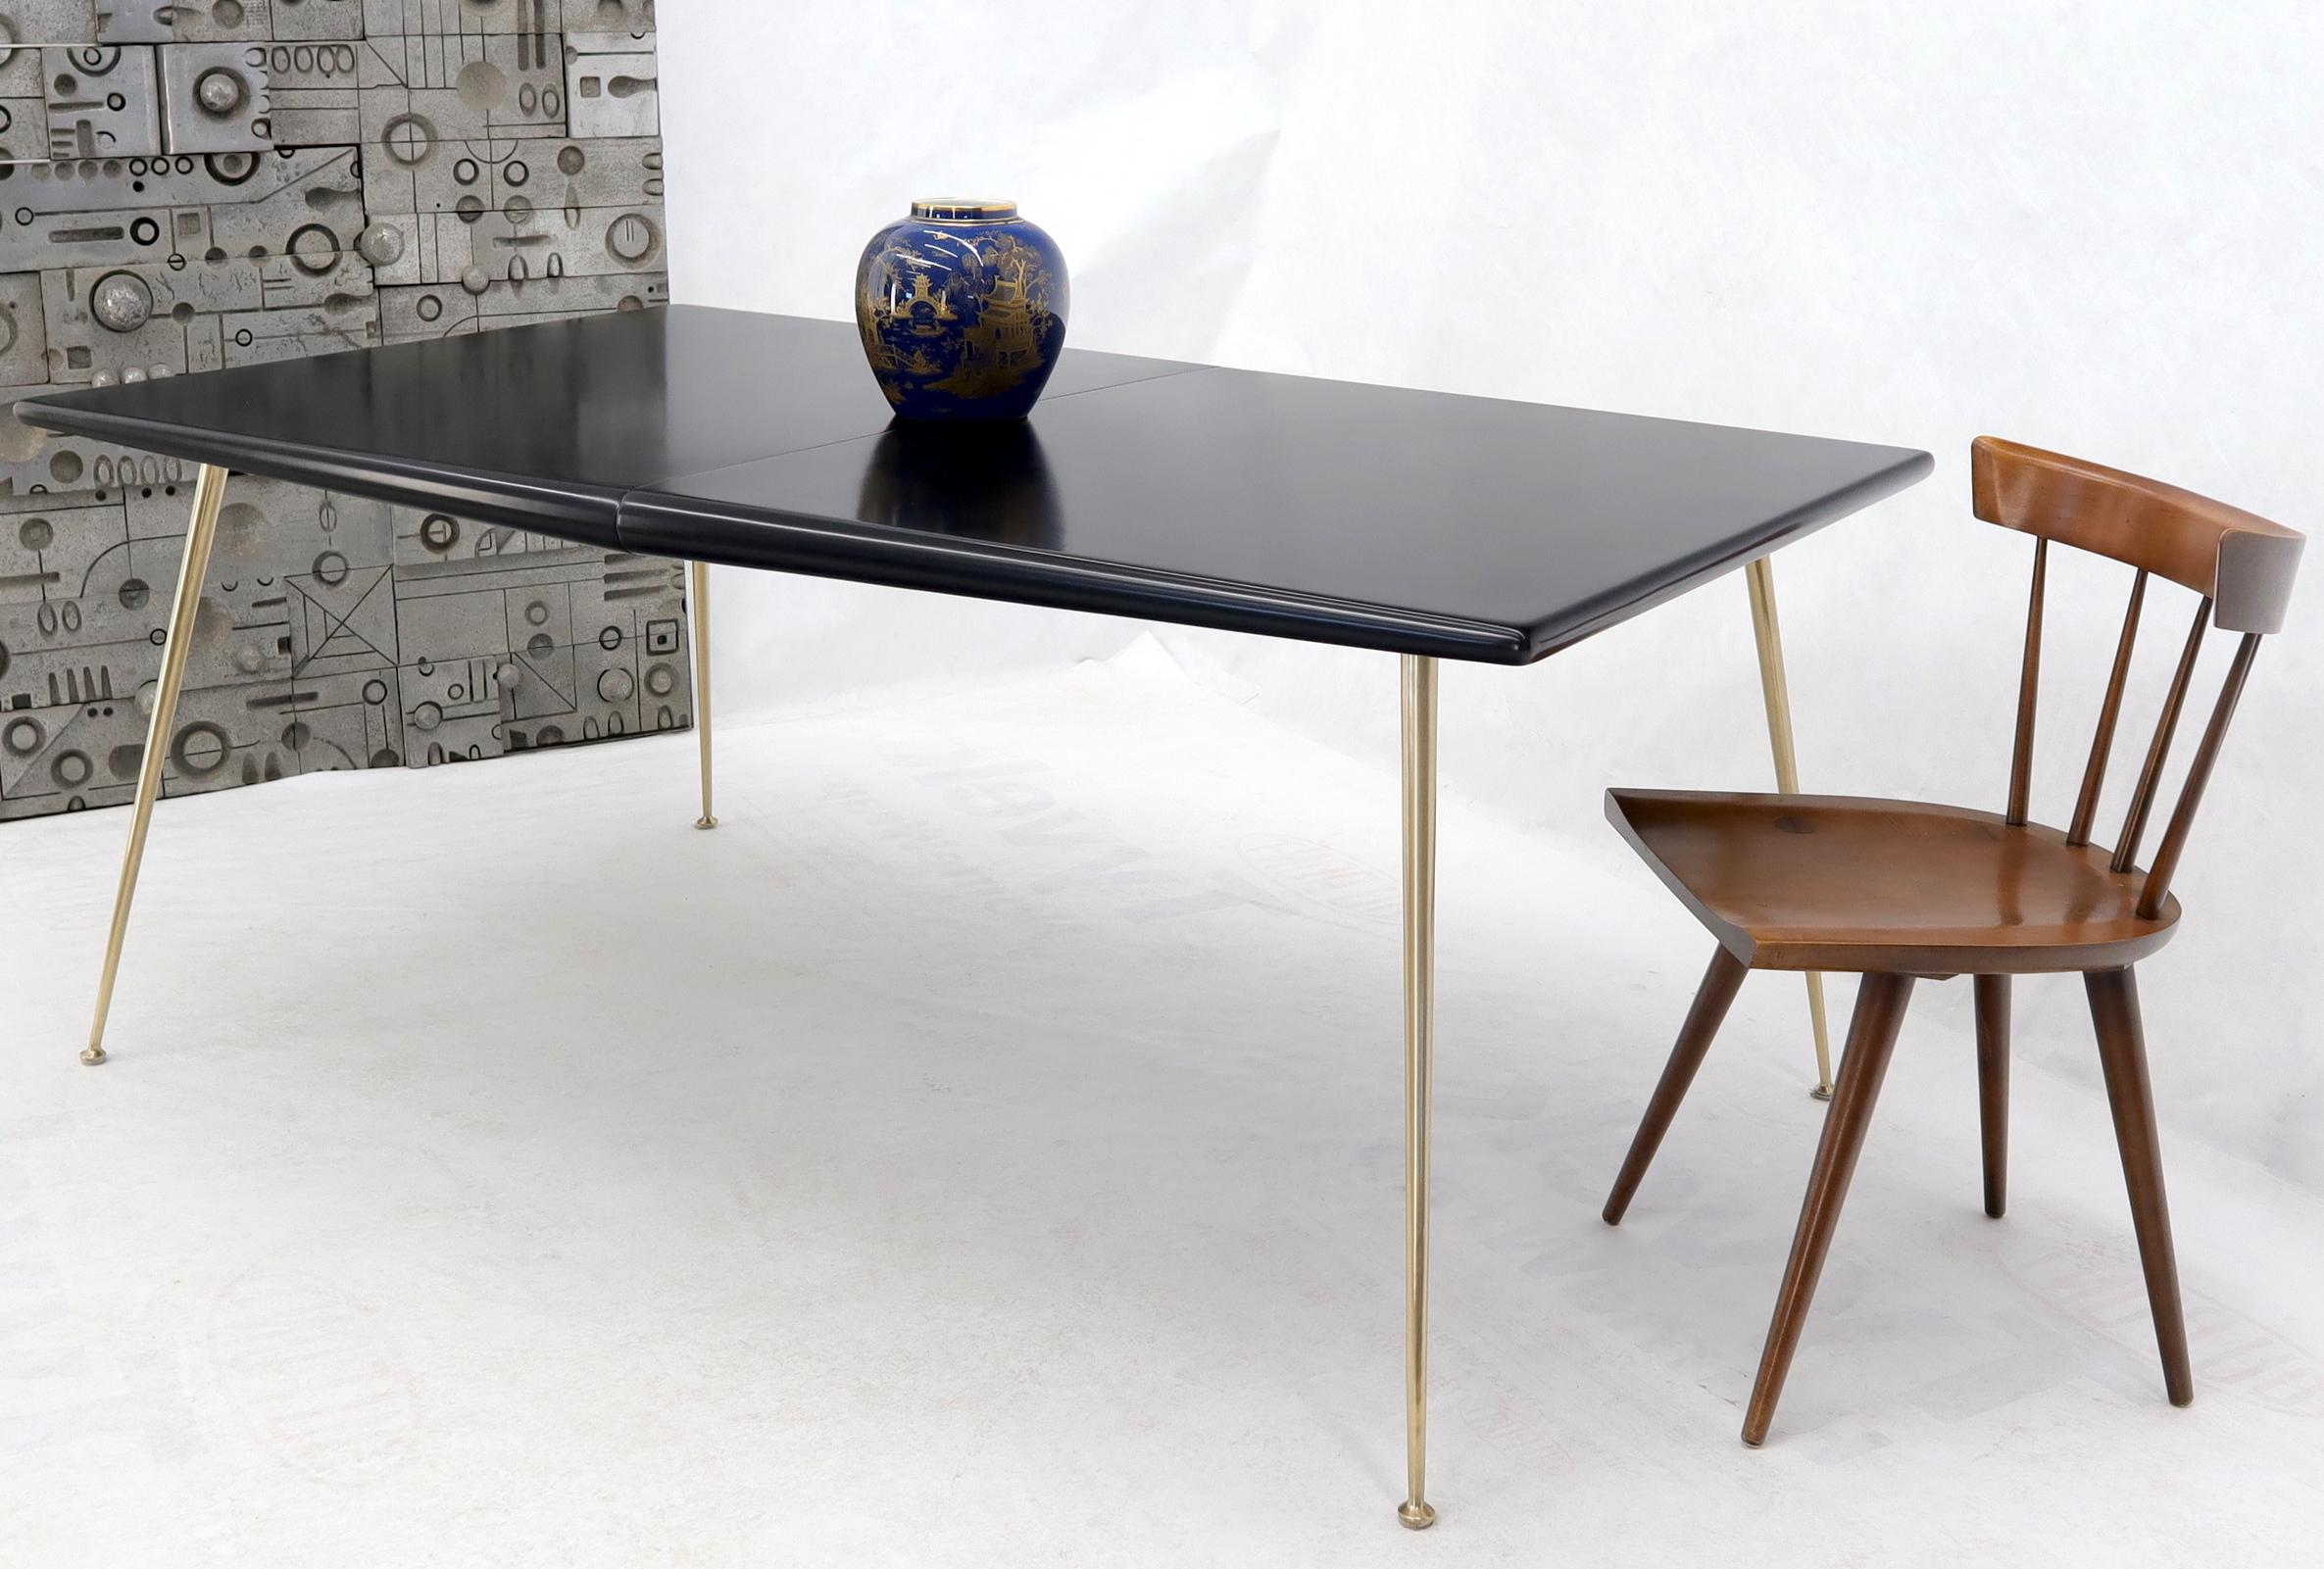 Mid-Century Modern black lacquer top brass legs dining table by Robsjohn-Gibbings. Comes with 1 x 18